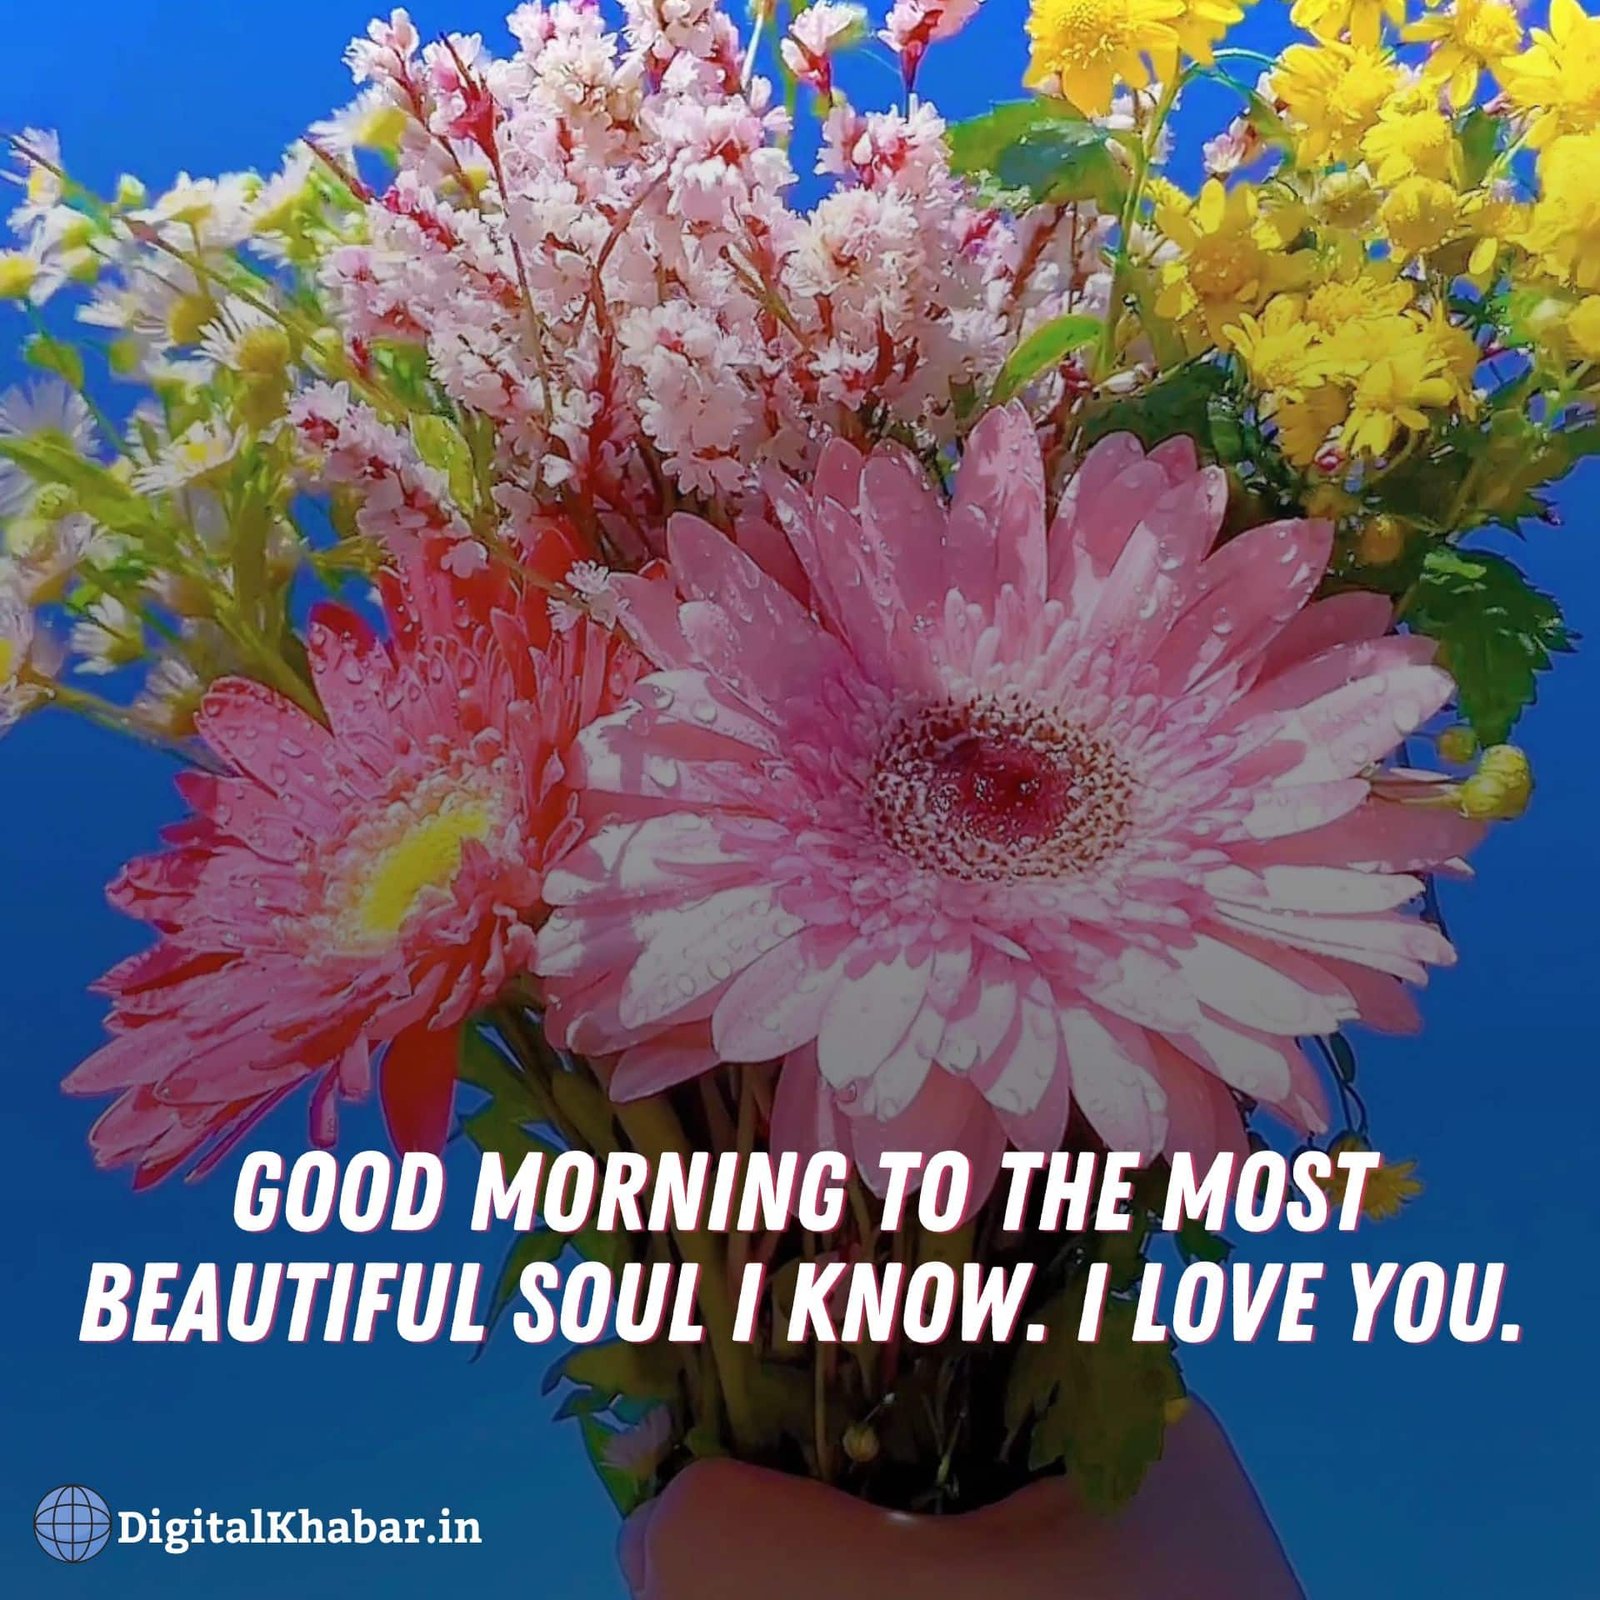 bunch-of-flowers-beautiful-good-morning-image